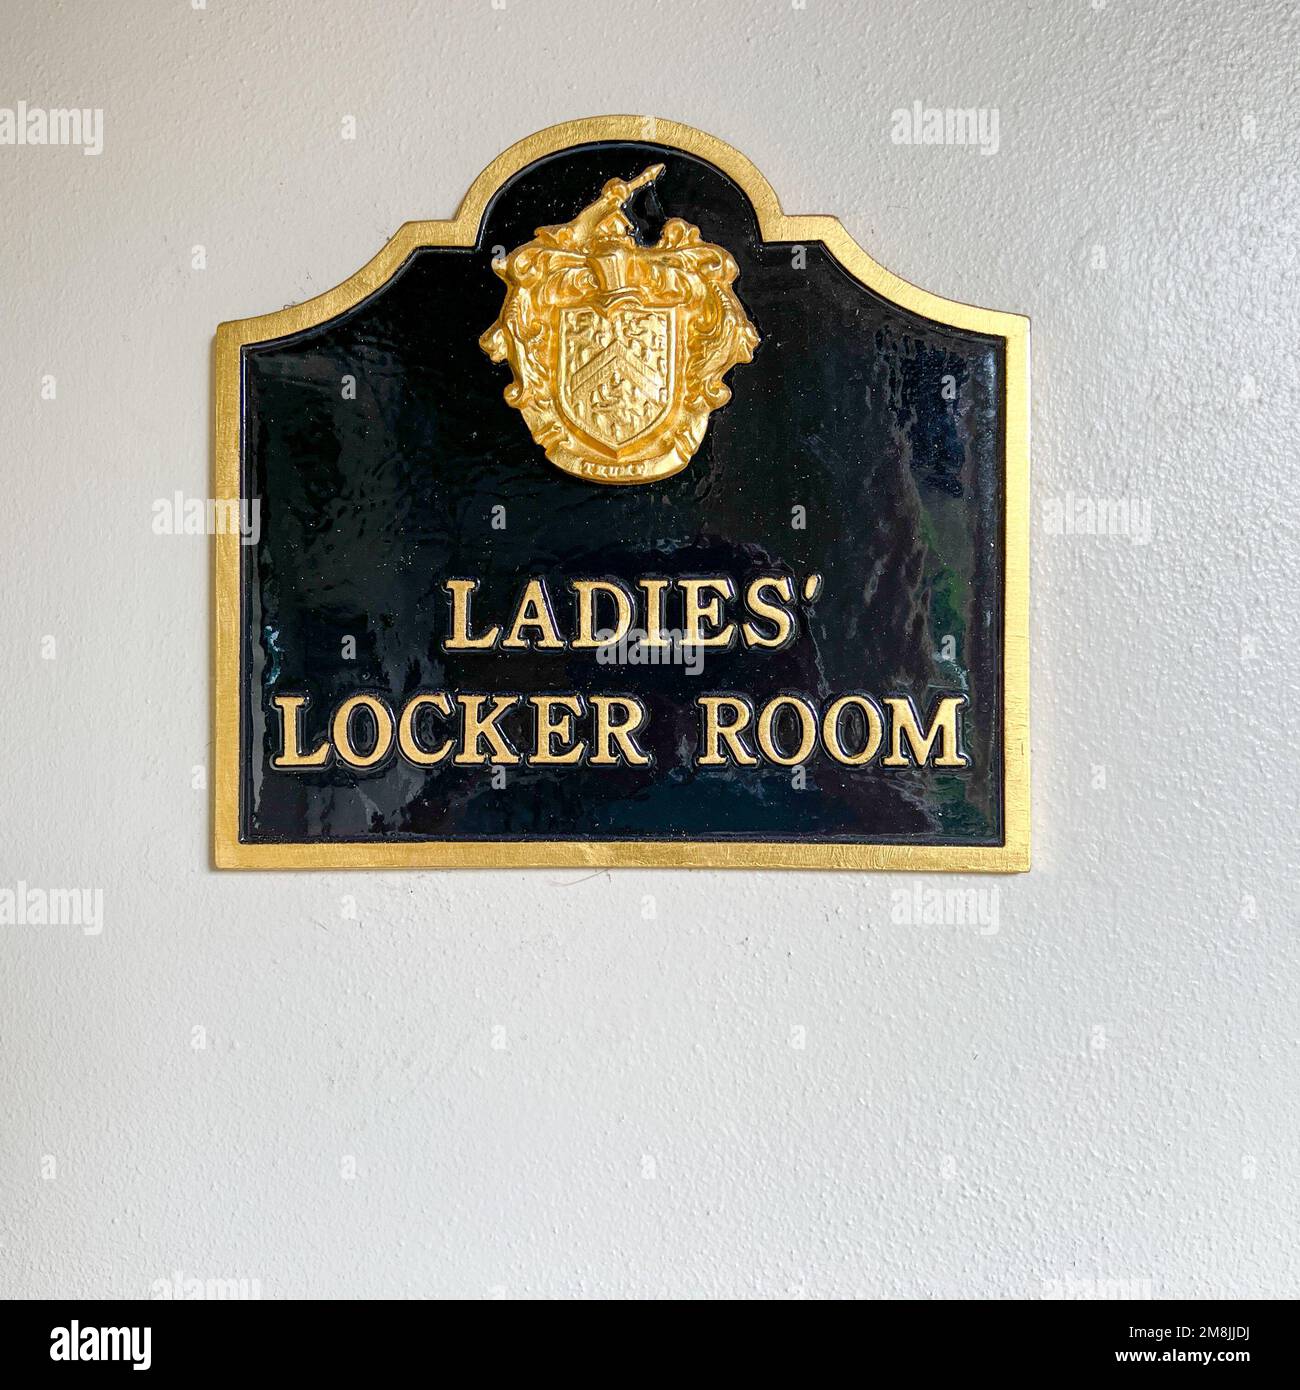 Jupiter, FL USA - May 31, 2022:  The Ladies Locker Room sign at the Trump National Golf Course club House in Jupiter, Florida. Stock Photo